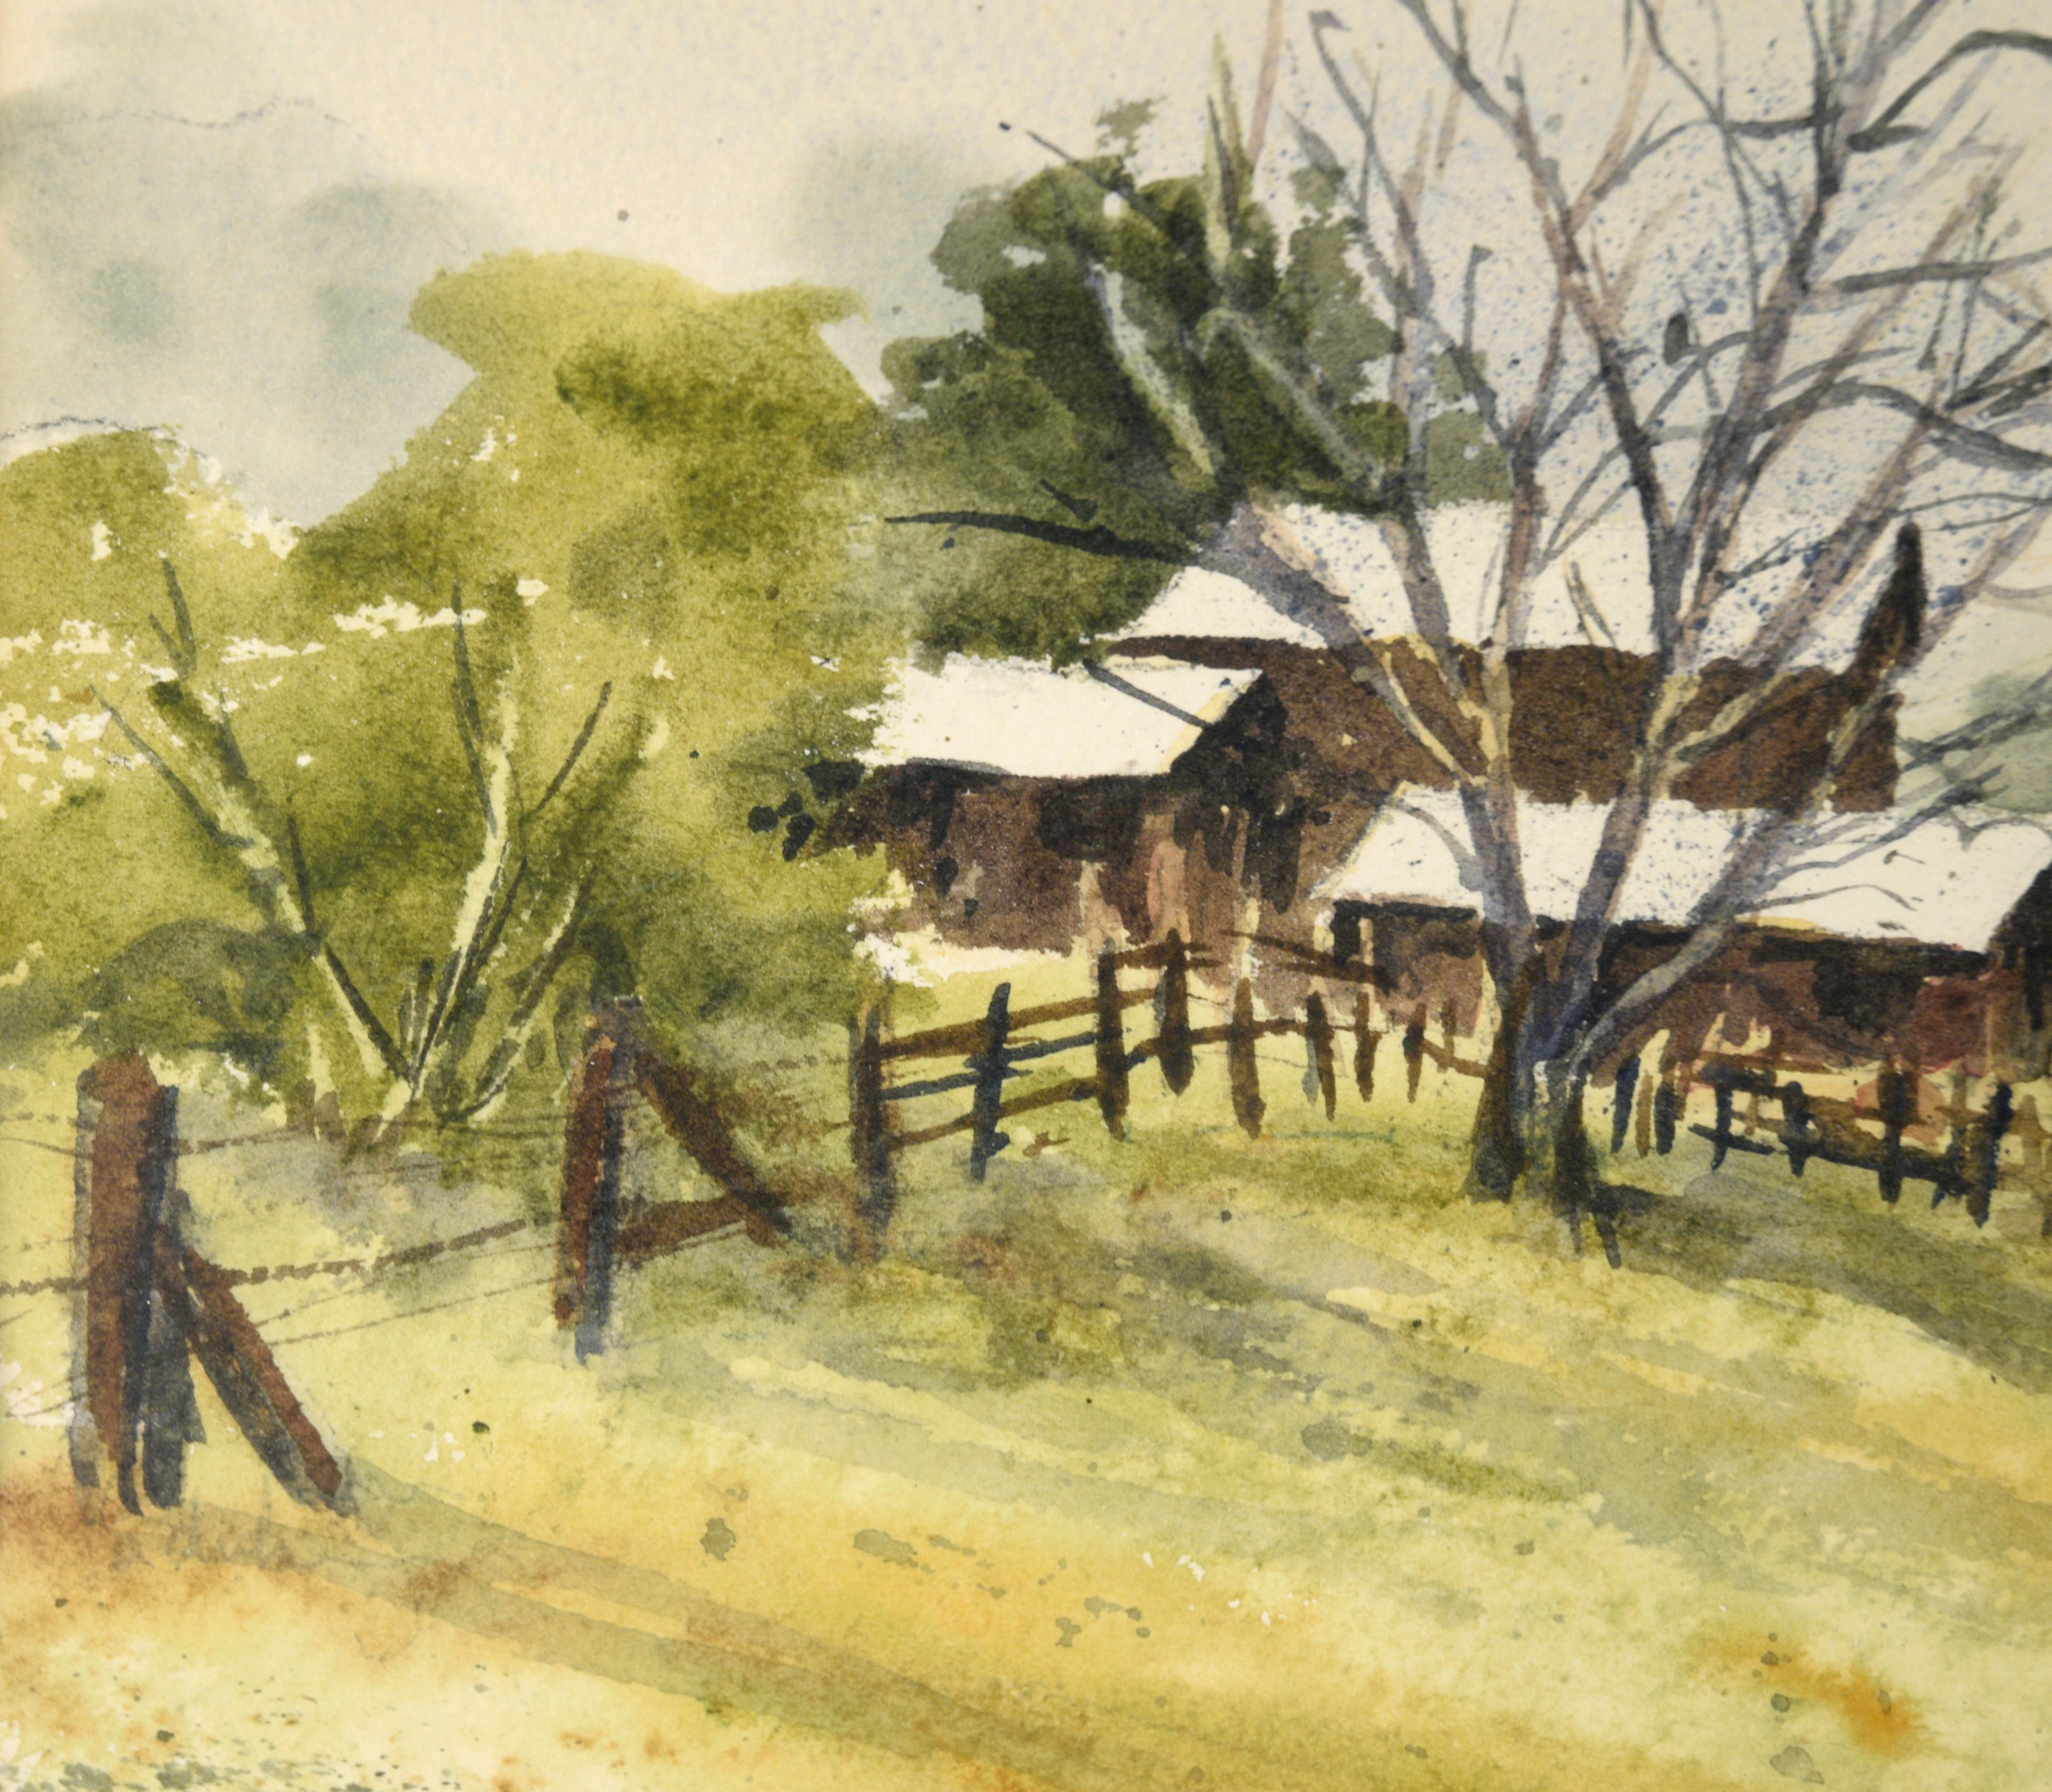 Grey Barn and Brown House - Rural California Landscape in Watercolor on Paper For Sale 1